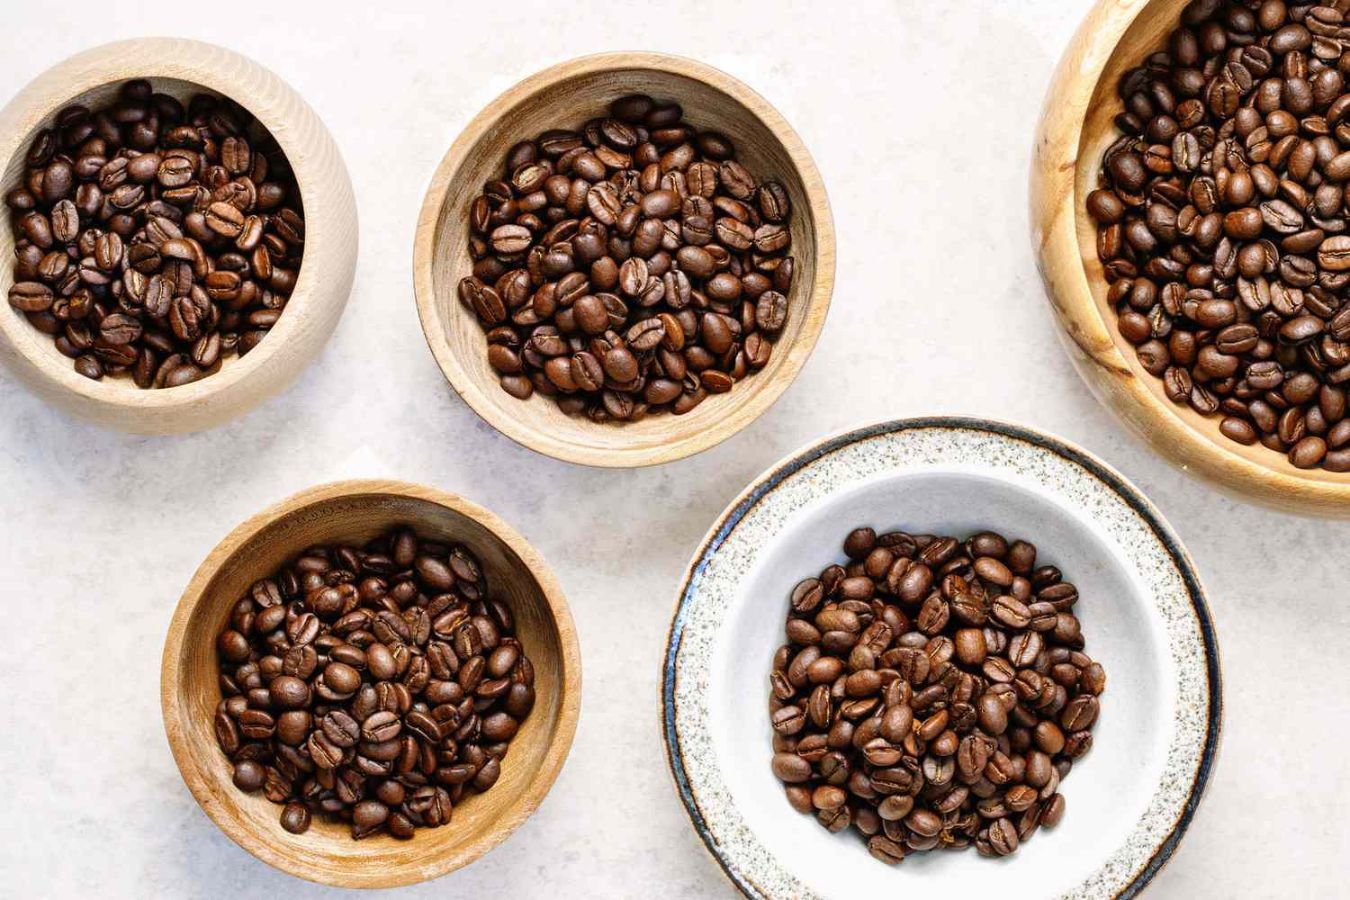 Choose the Kind of Coffee Beans that Match the Menu